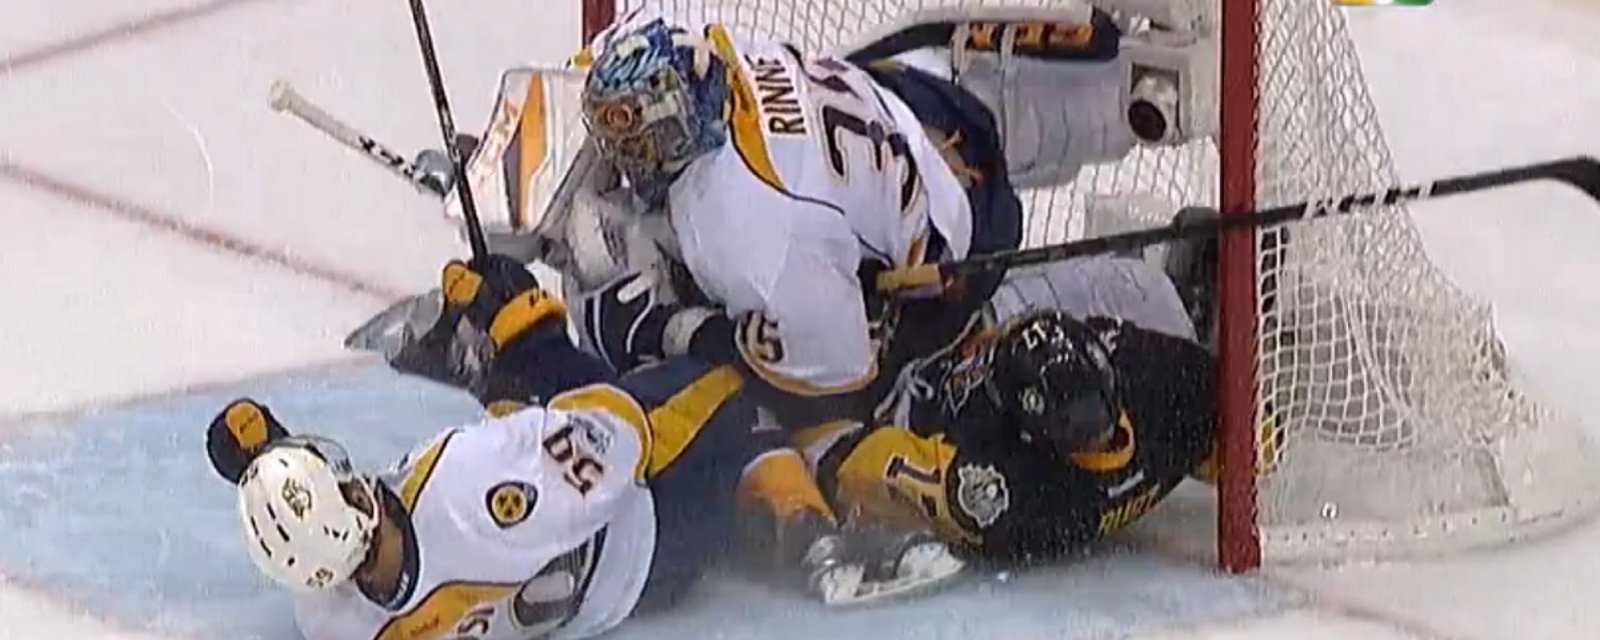 Pekka Rinne gets run over by two different players in huge collision. 